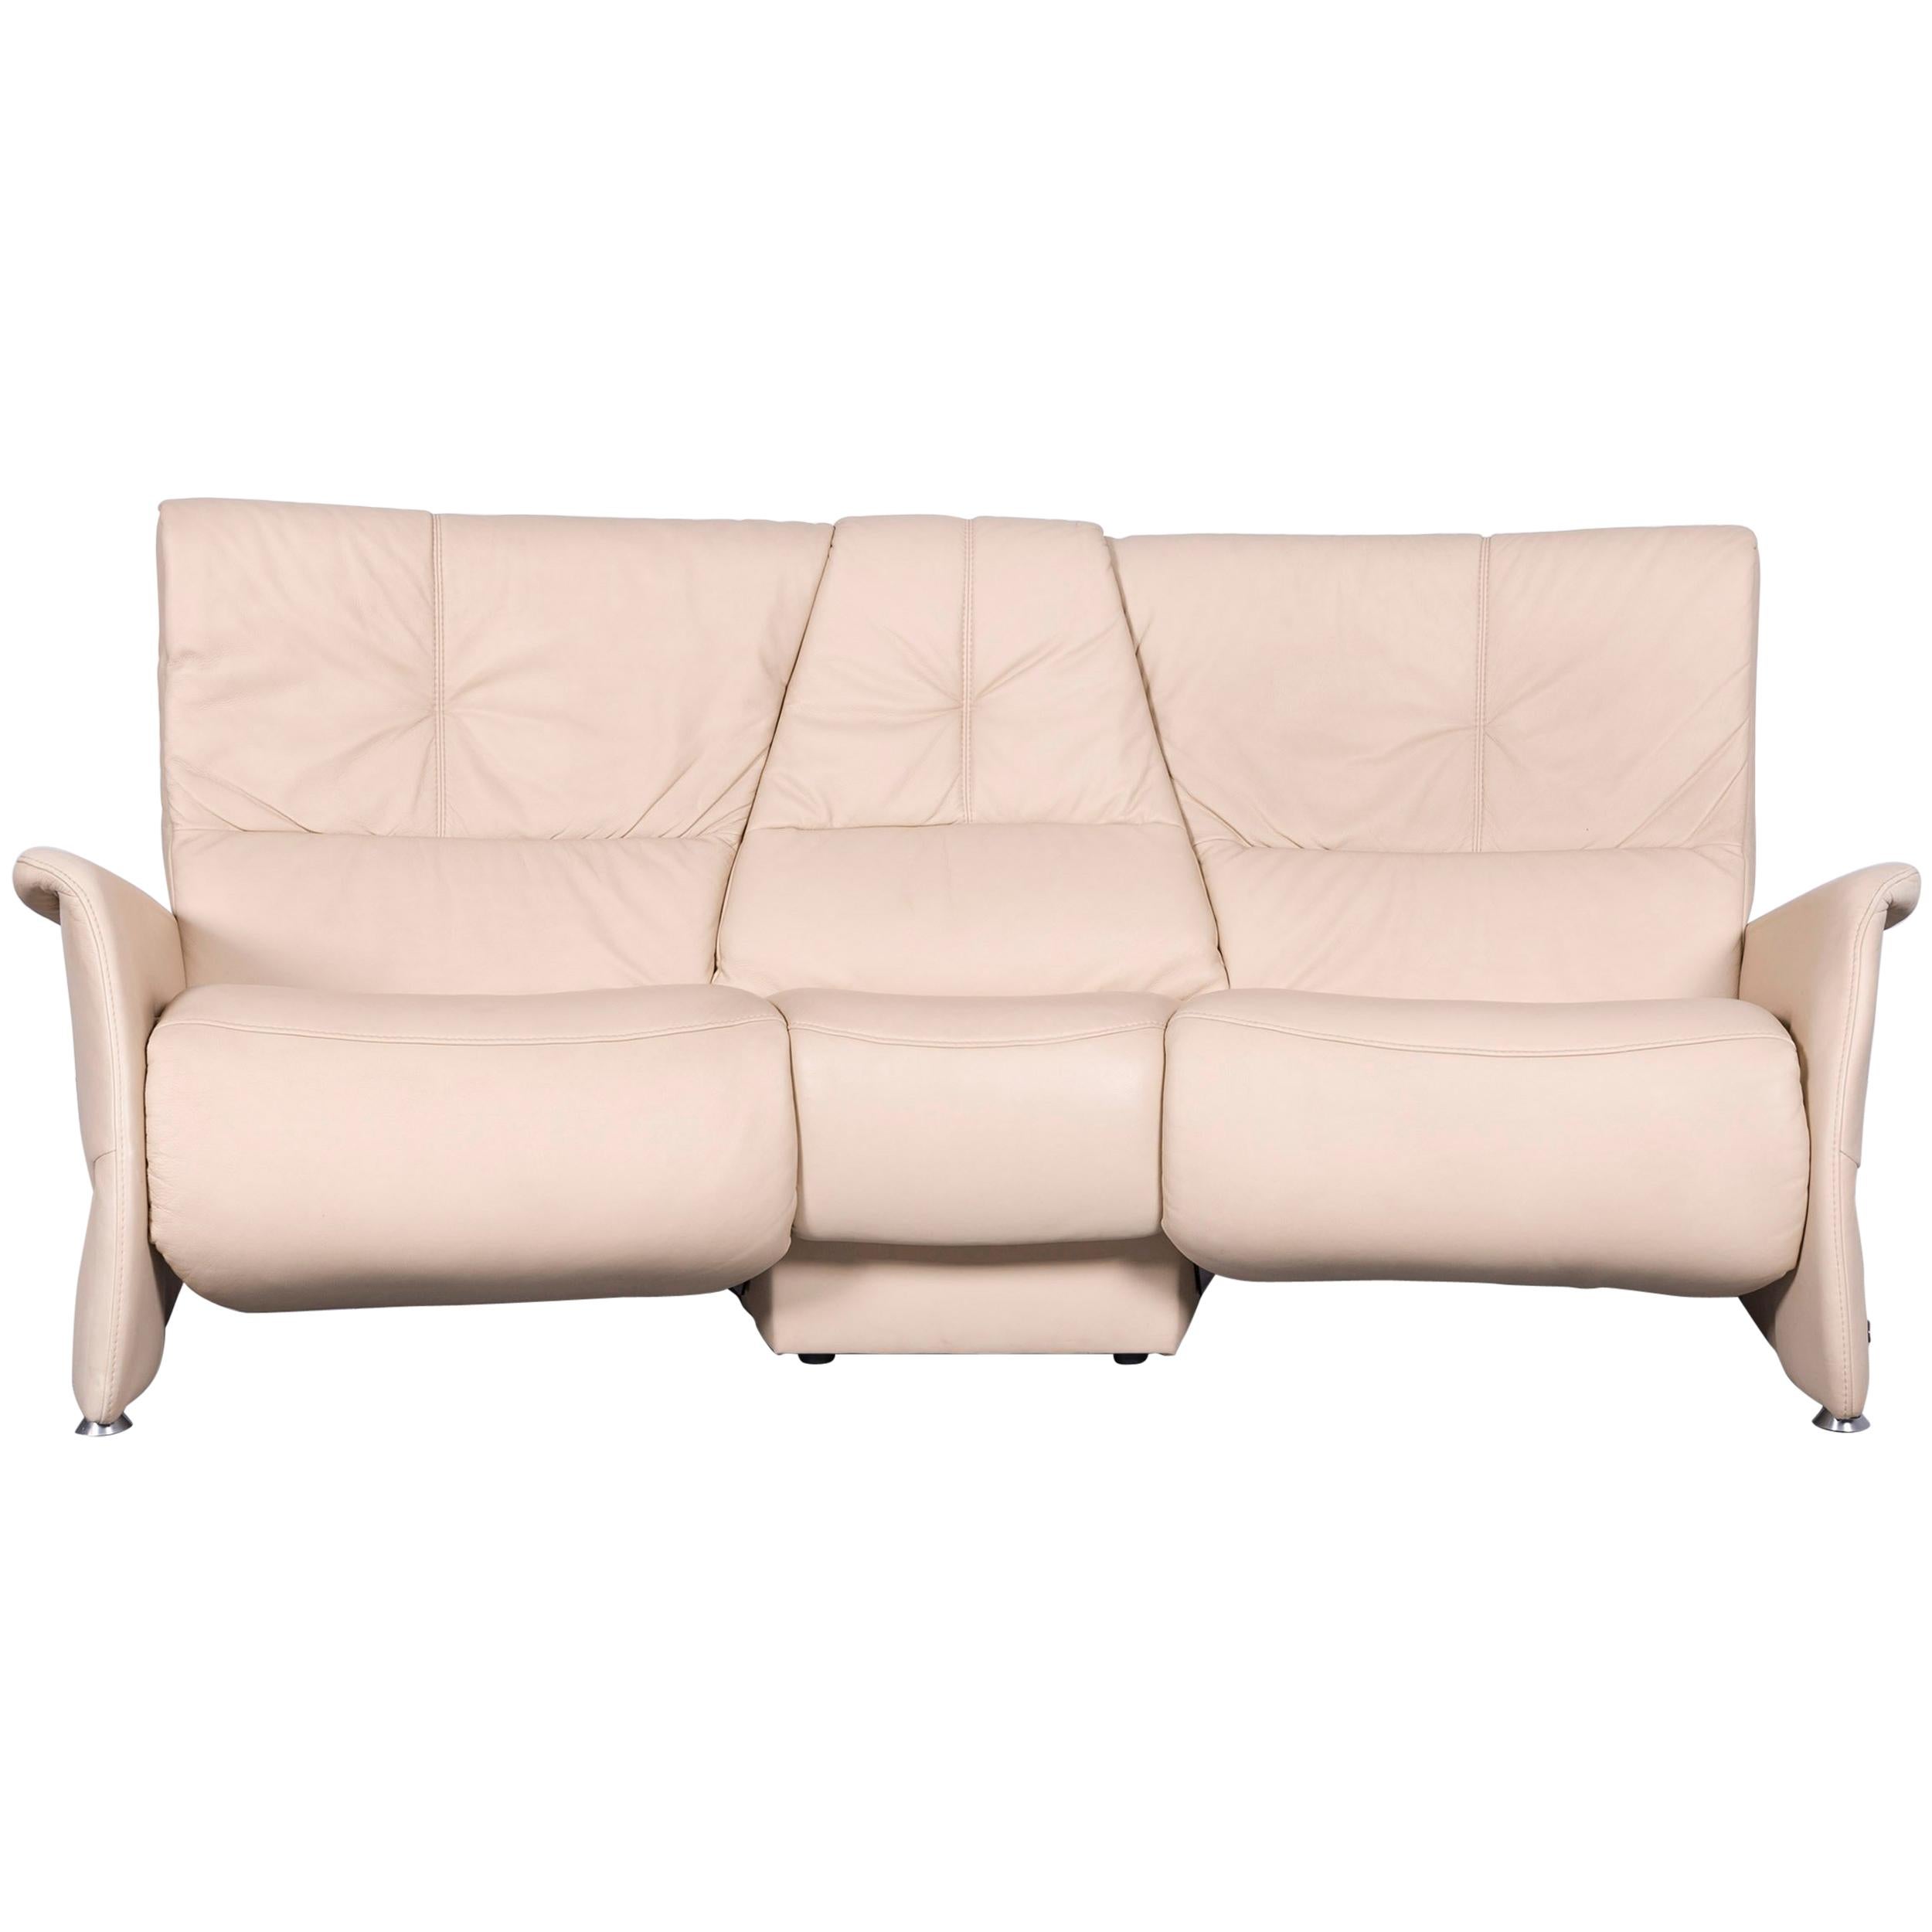 Himolla Designer Sofa Beige Three-Seat Couch Recliner Function For Sale